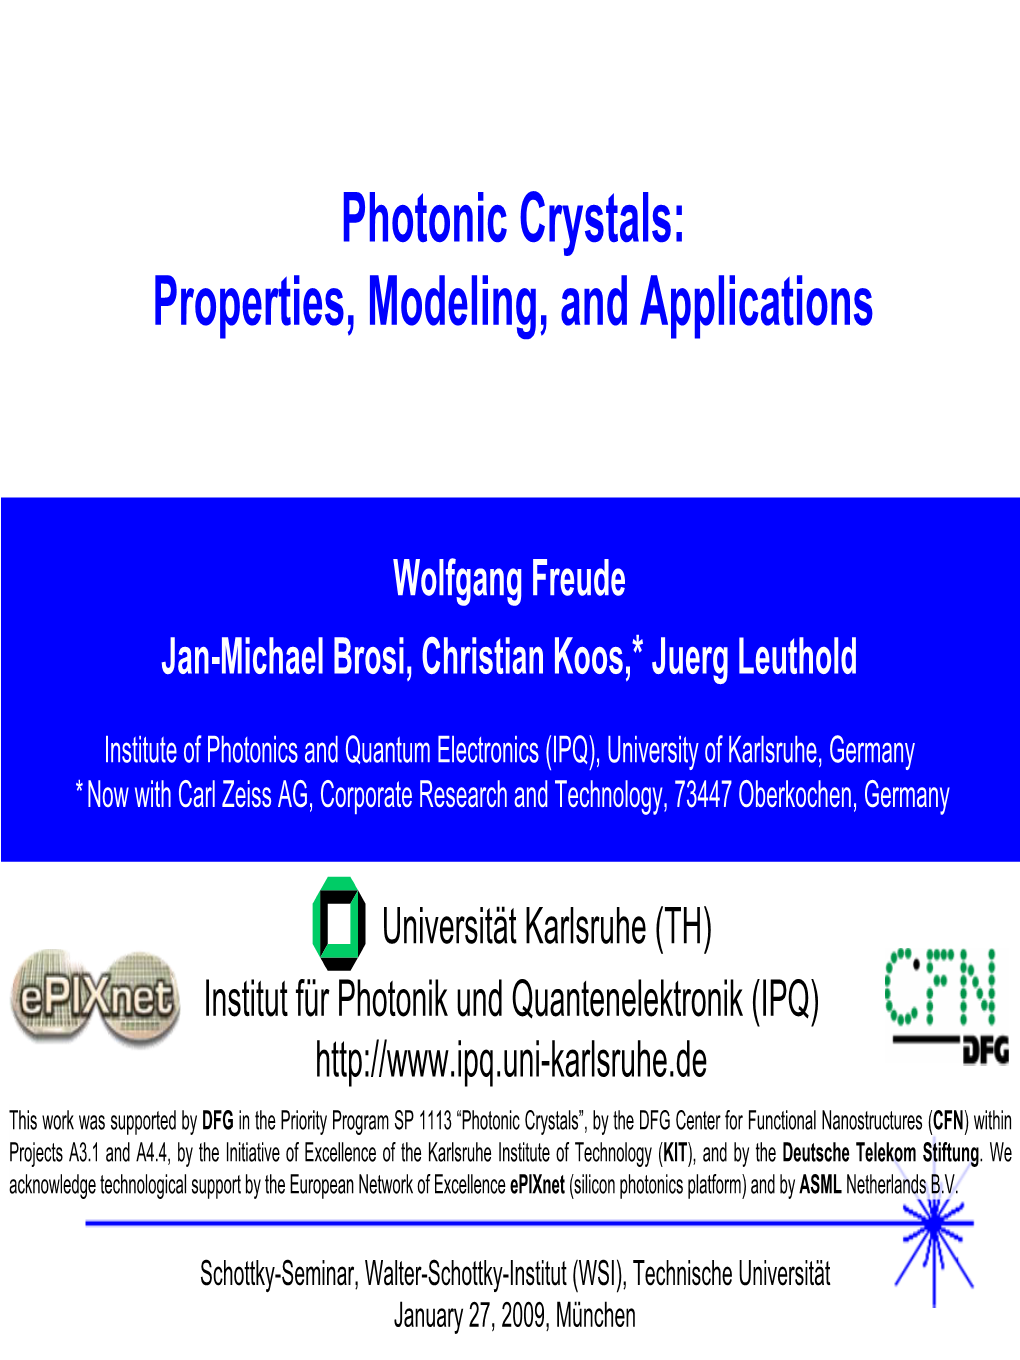 Photonic Crystals: Properties, Modeling, and Applications